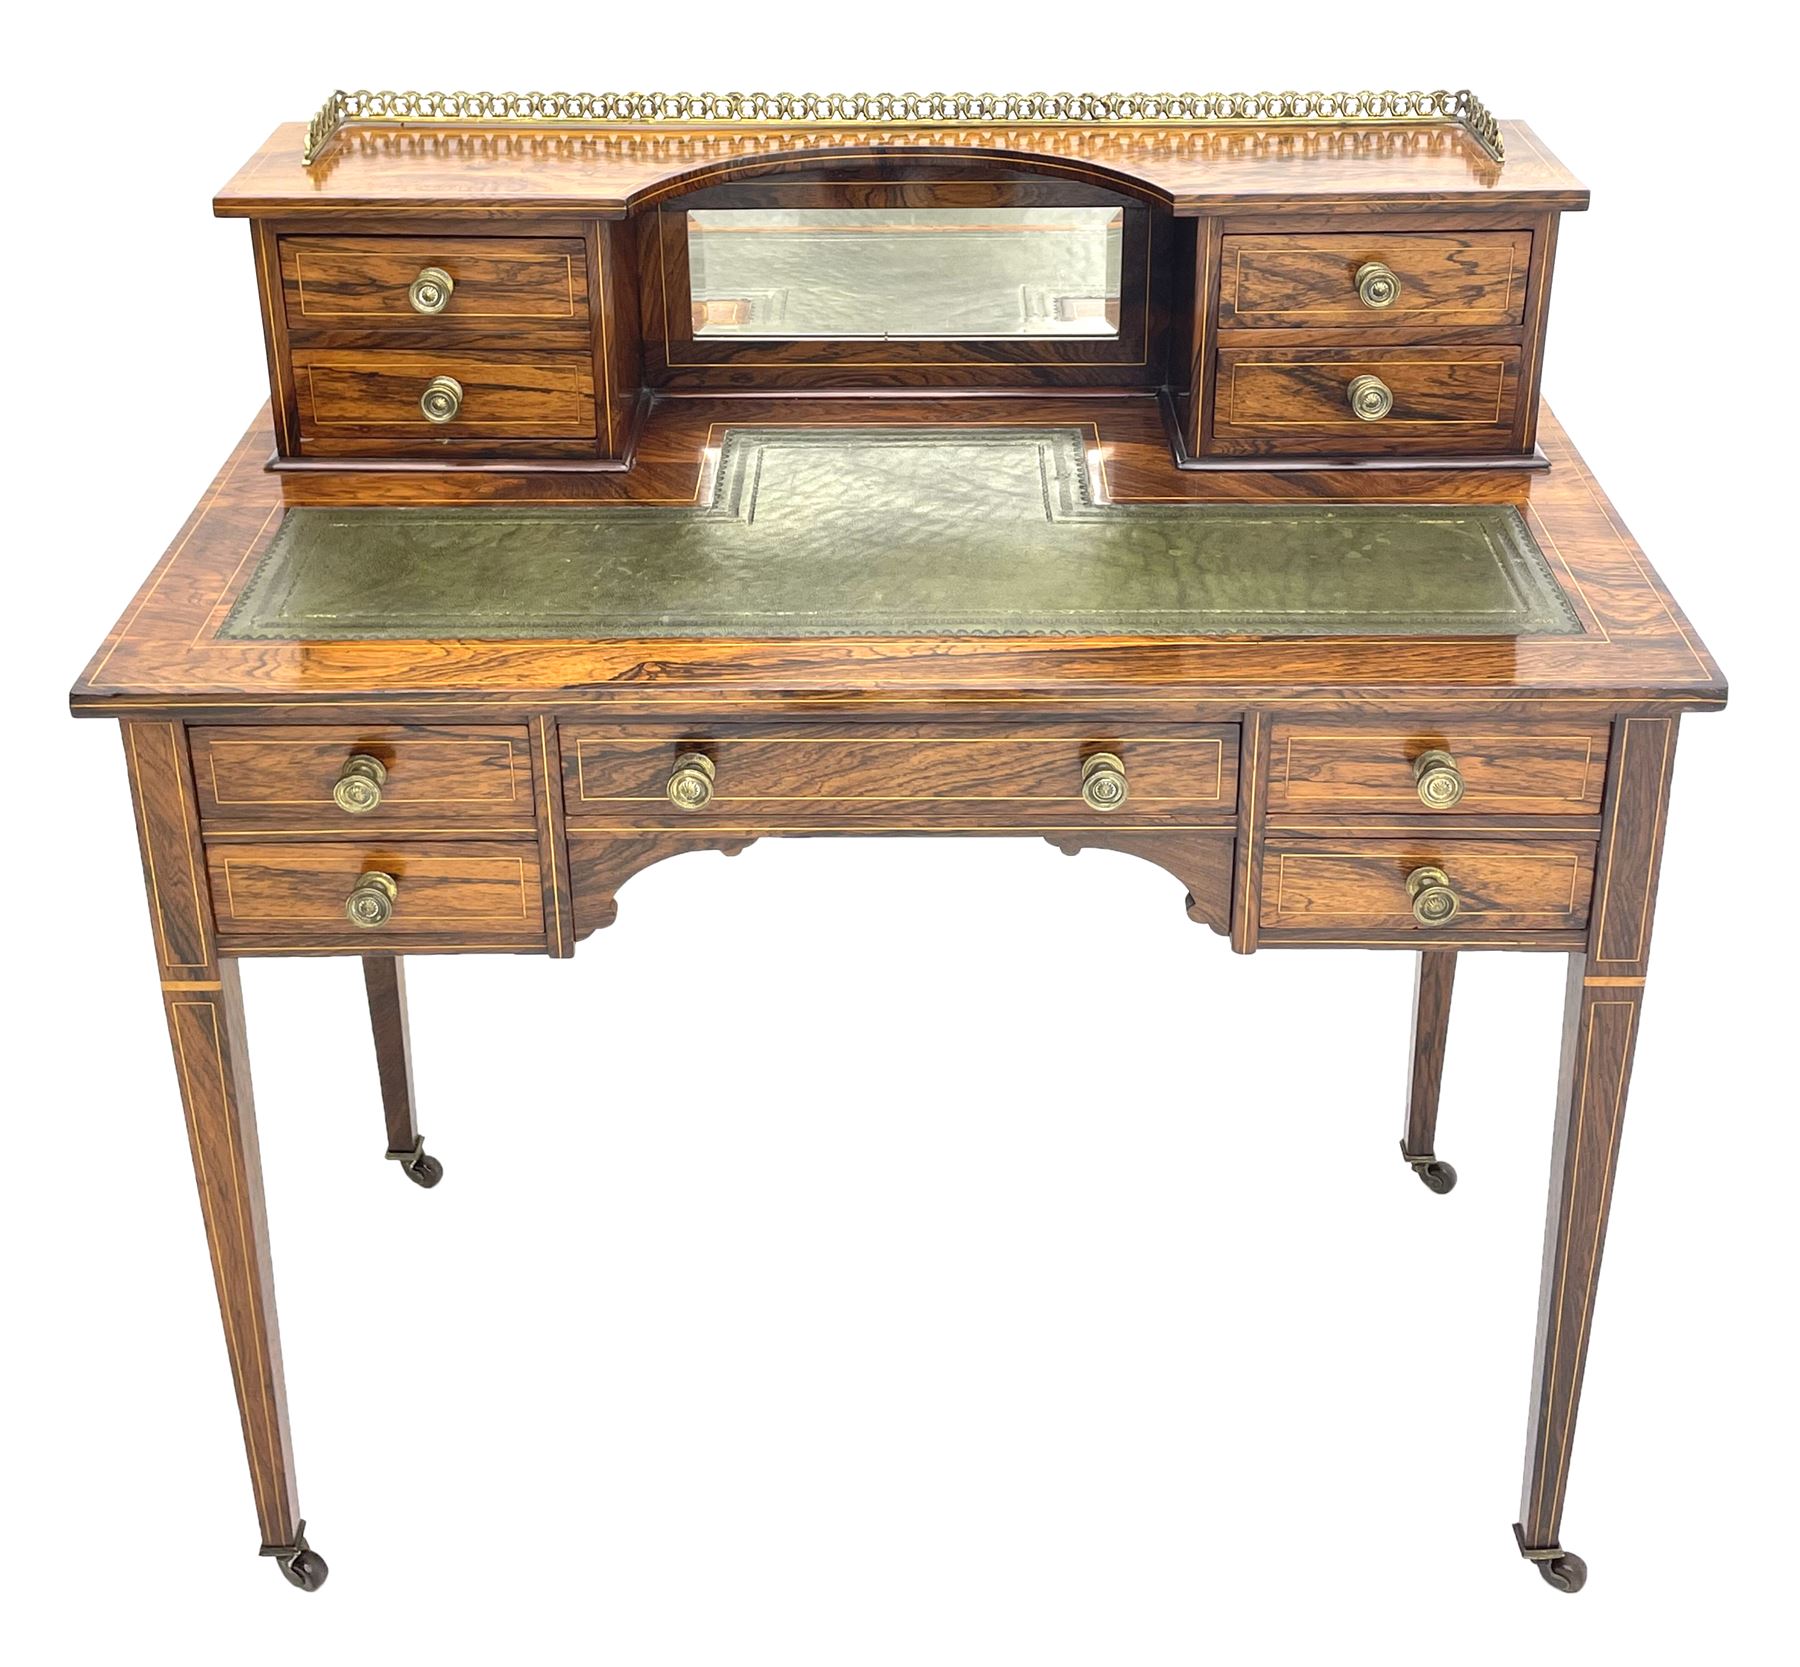 Late Victorian inlaid rosewood writing desk